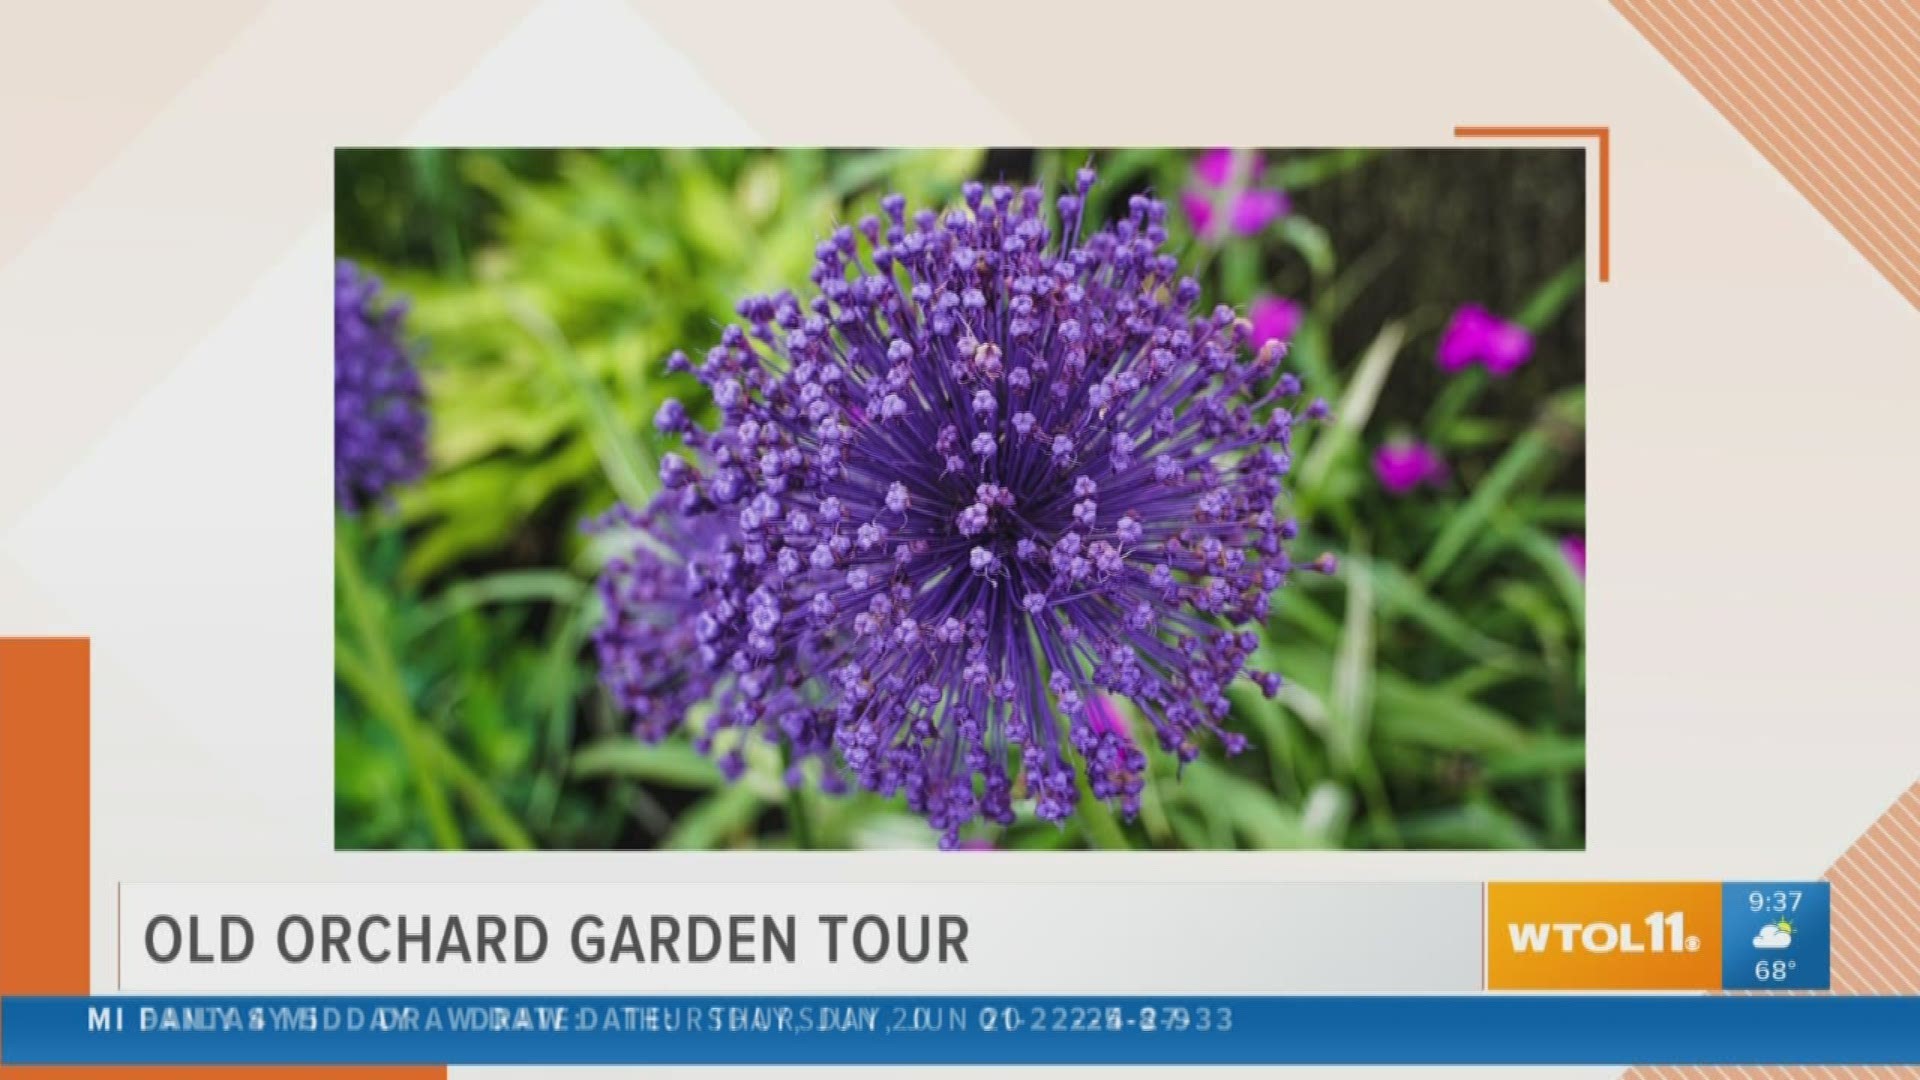 It's that time of year: check out the Old Orchard Garden Tour this Sunday!